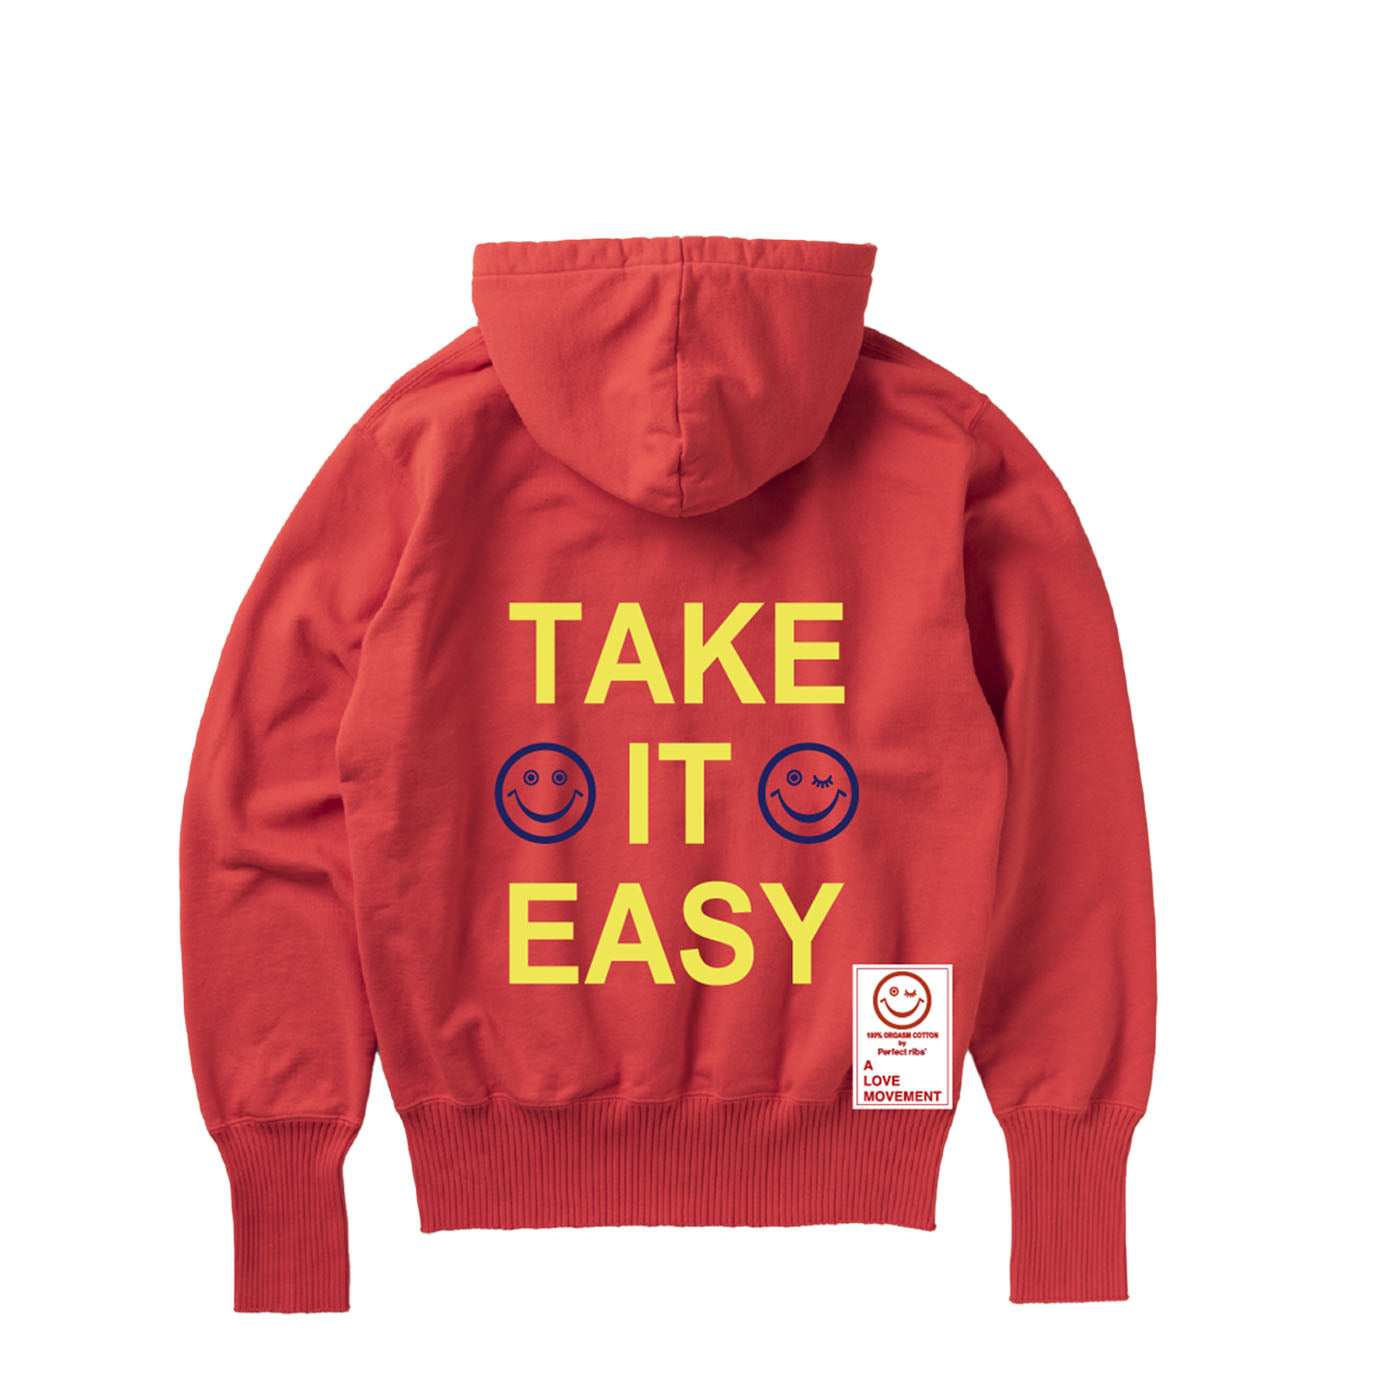 【Perfect ribs®︎×A LOVE MOVEMENT】"RELAX & TAKE IT EASY"Basic Hoodie / Red(ベーシック フーディー/レッド)